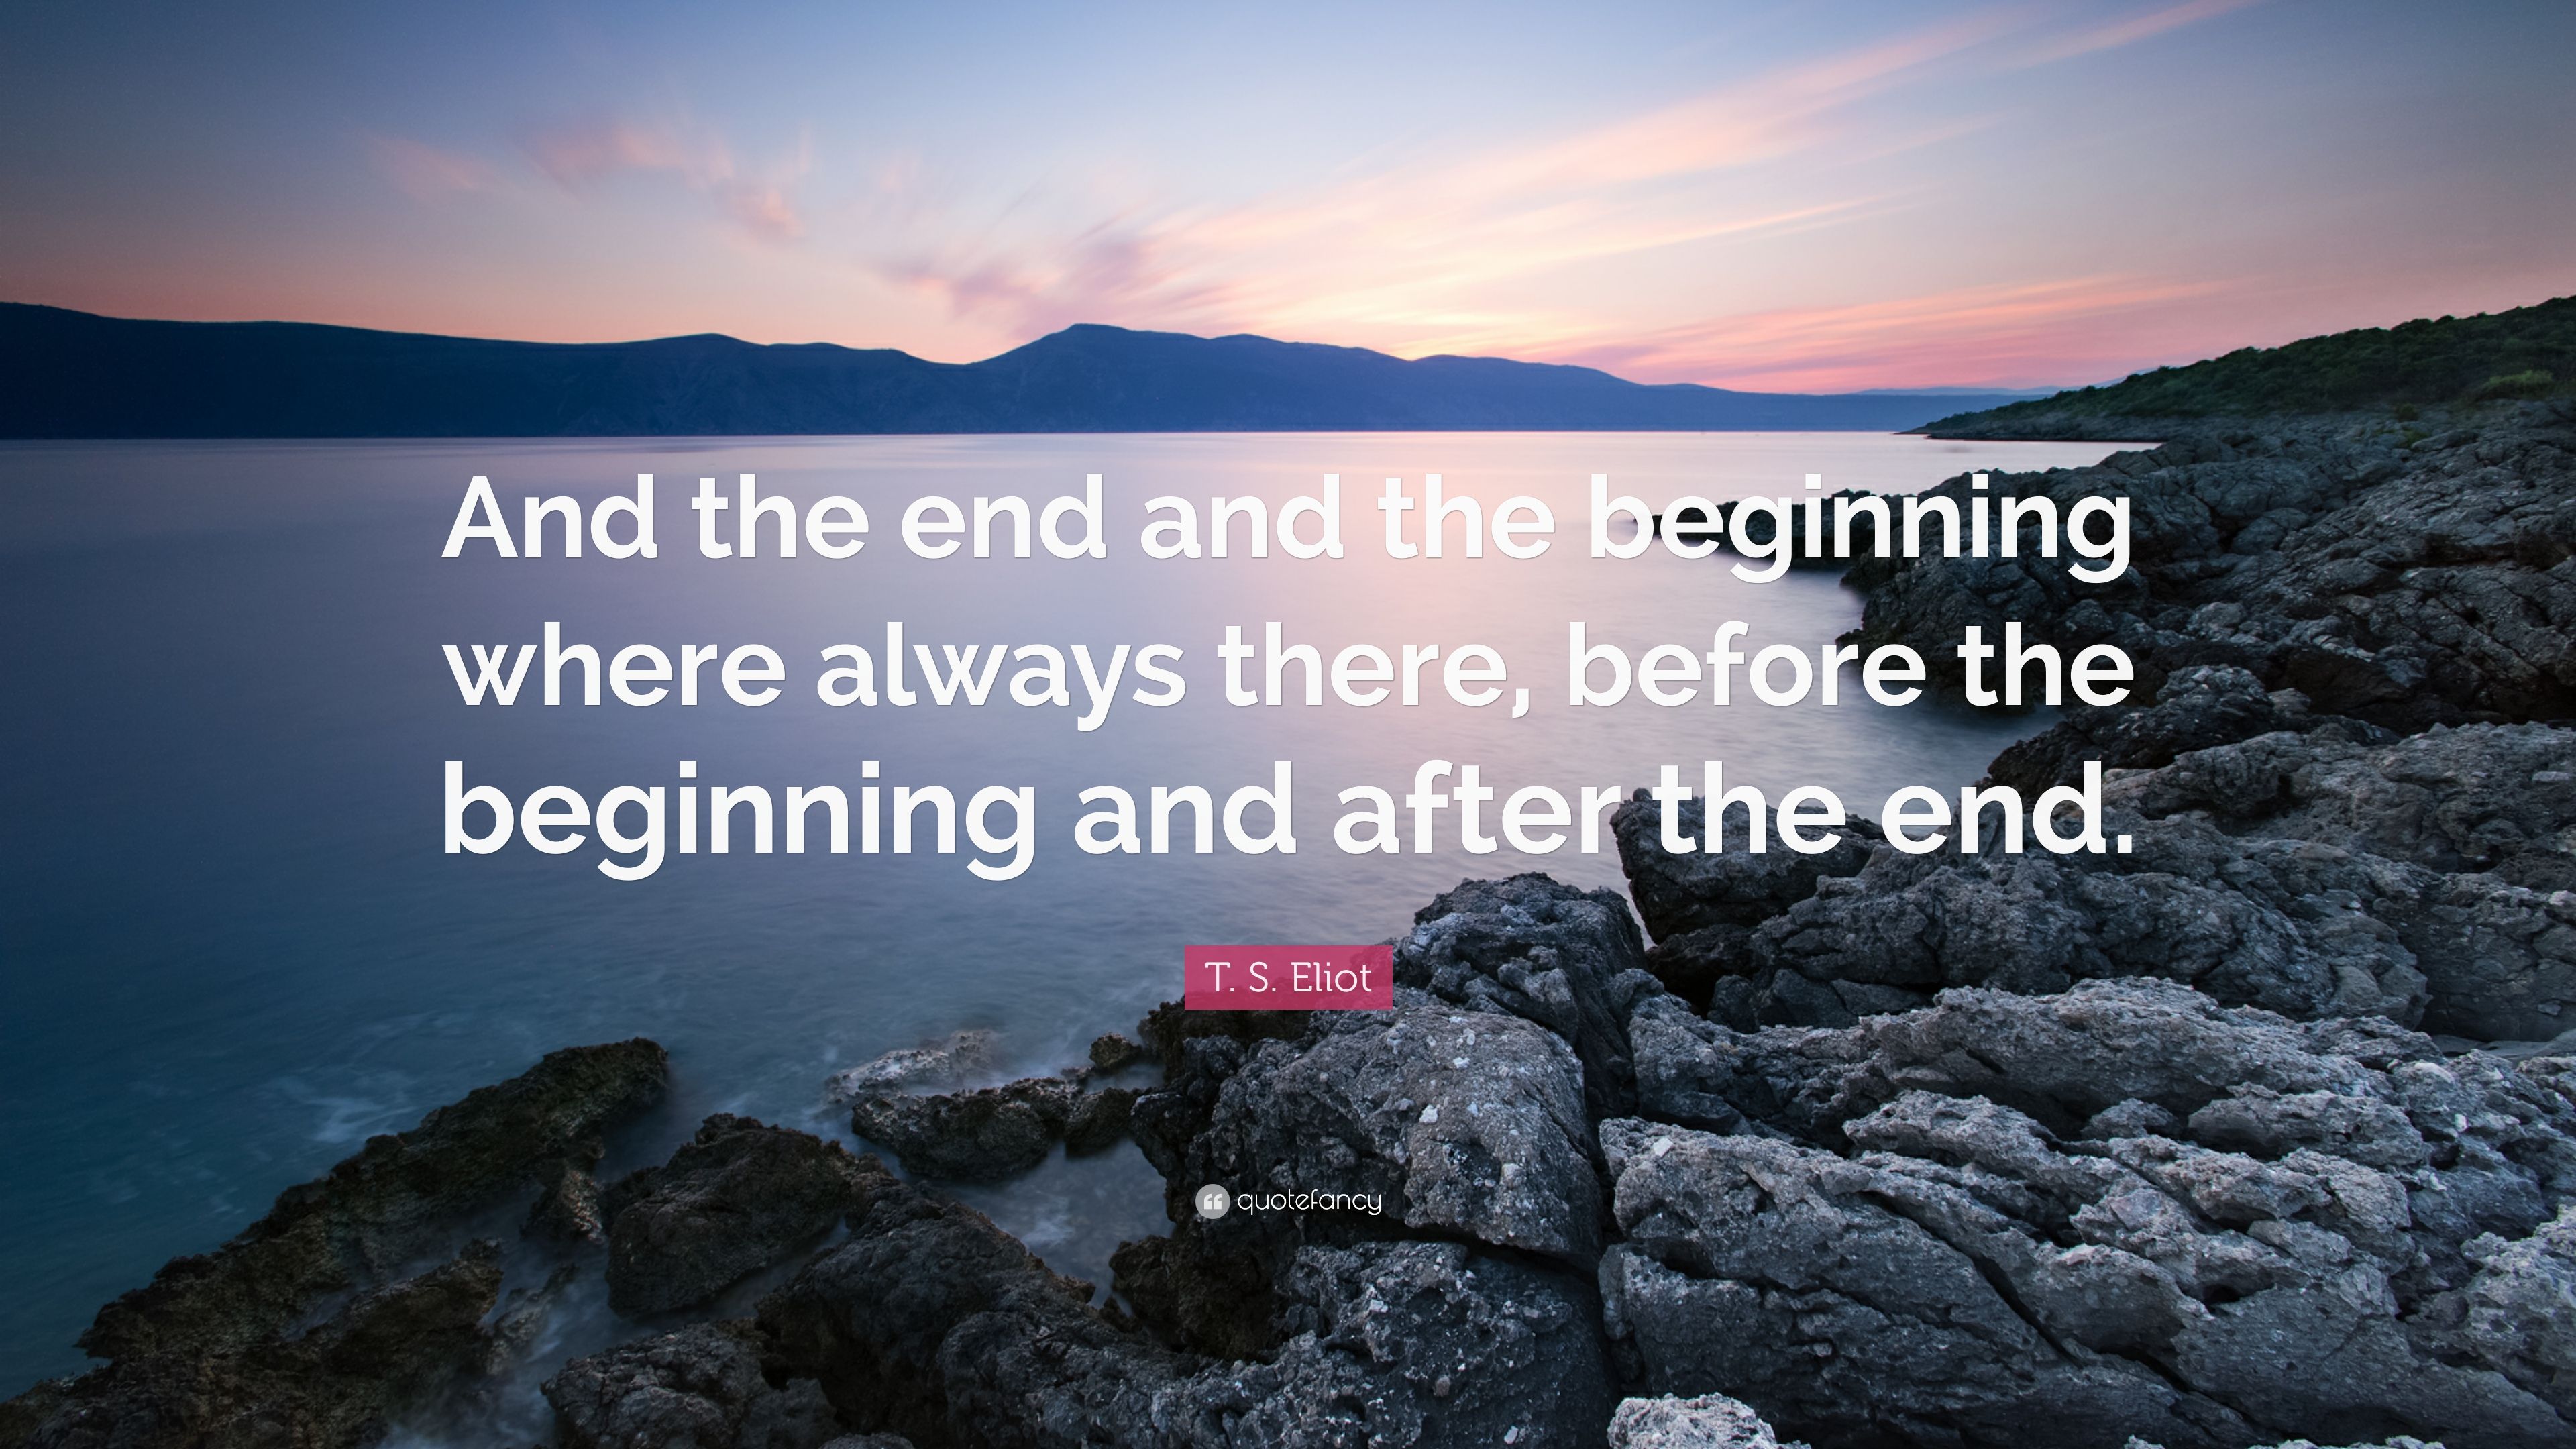 T. S. Eliot Quote: “And the end and the beginning where always